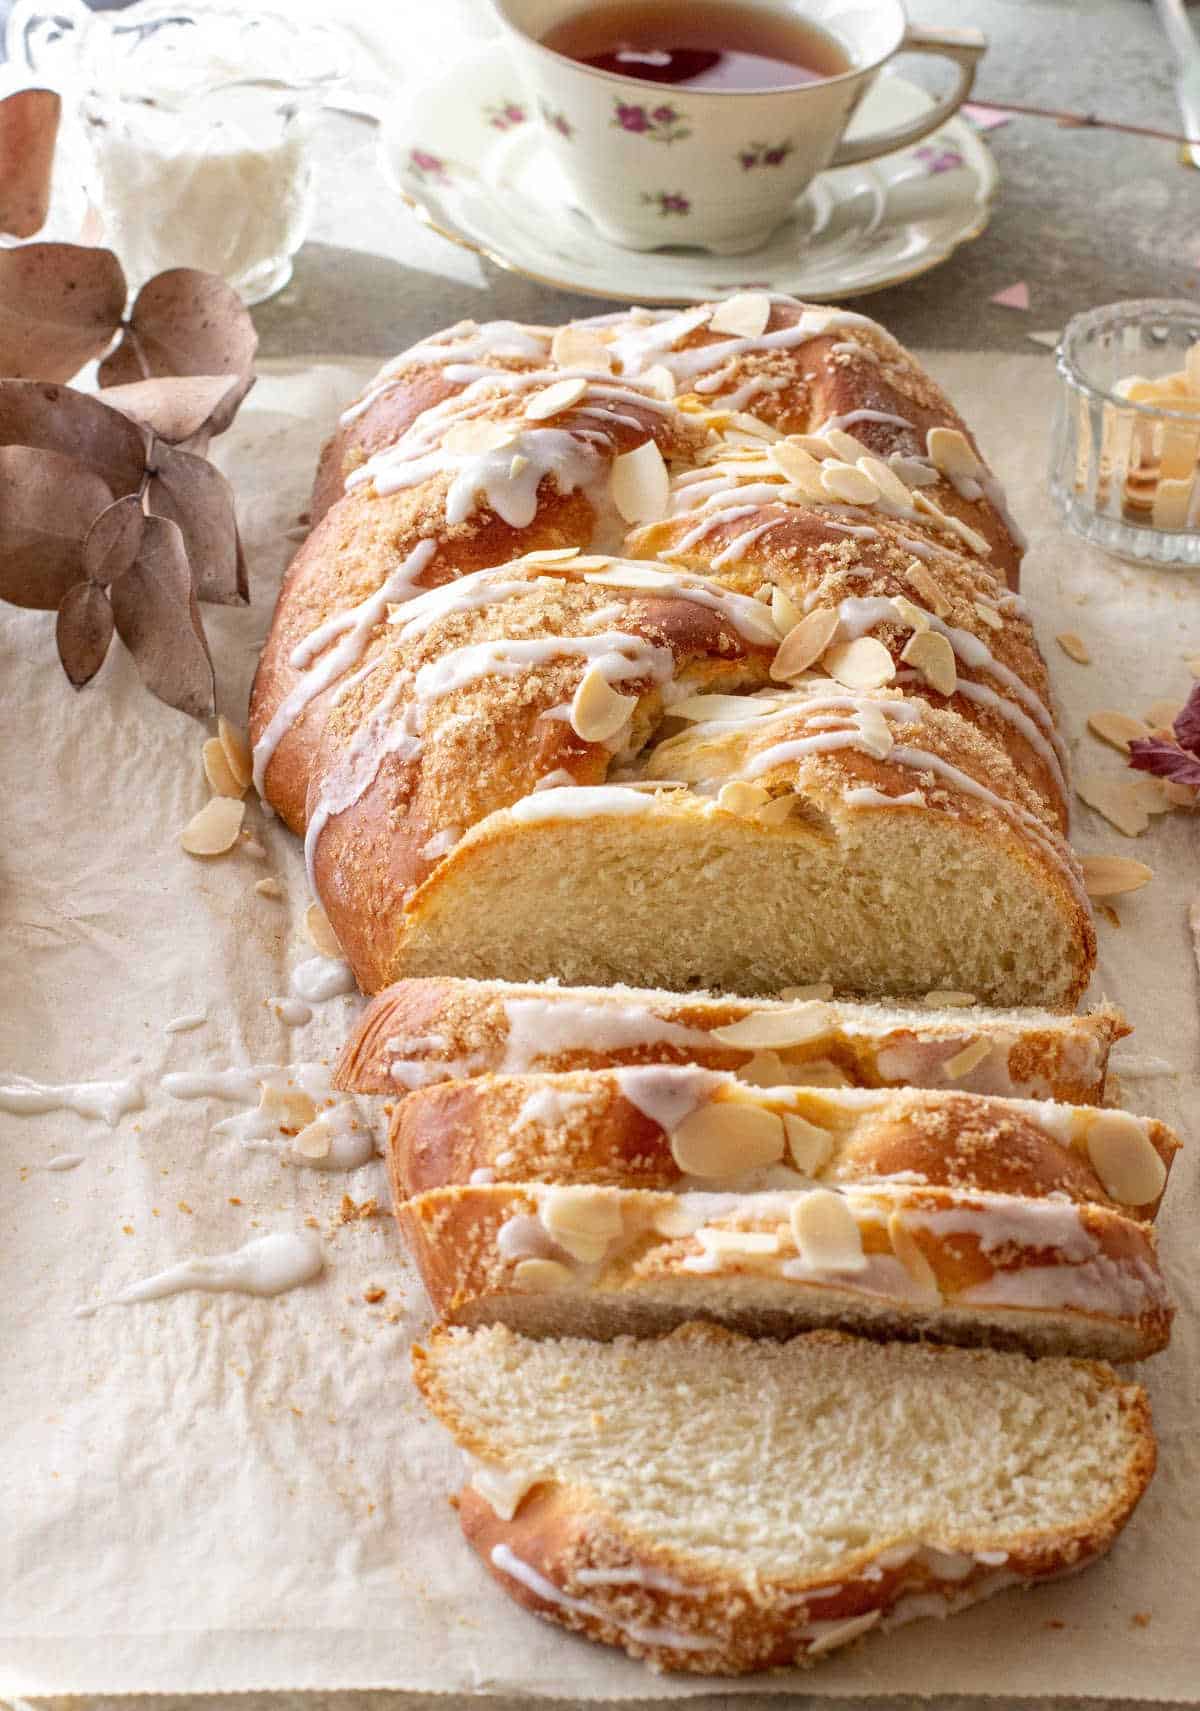 A loaf of glazed braided Easter Bread with sliced almonds. Beige surface. A cup of tea in the background.